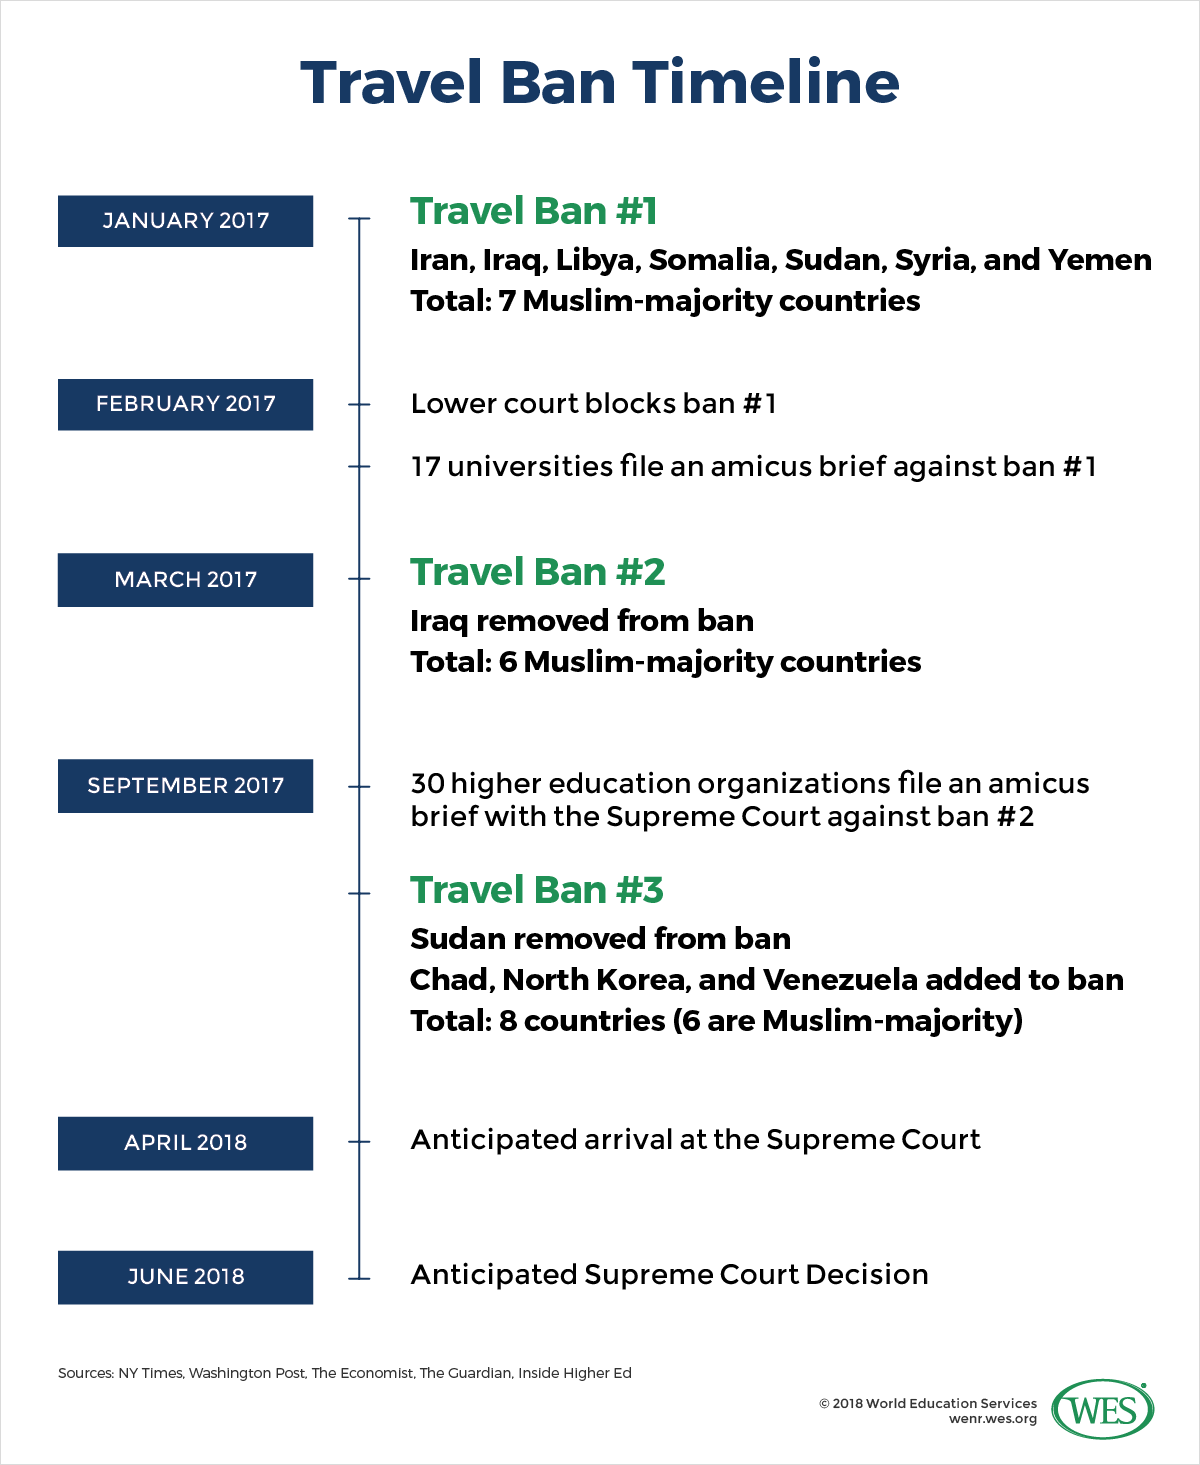 A timeline showing the major travel-ban-related events that occurred between January 2017 and June 2018. 